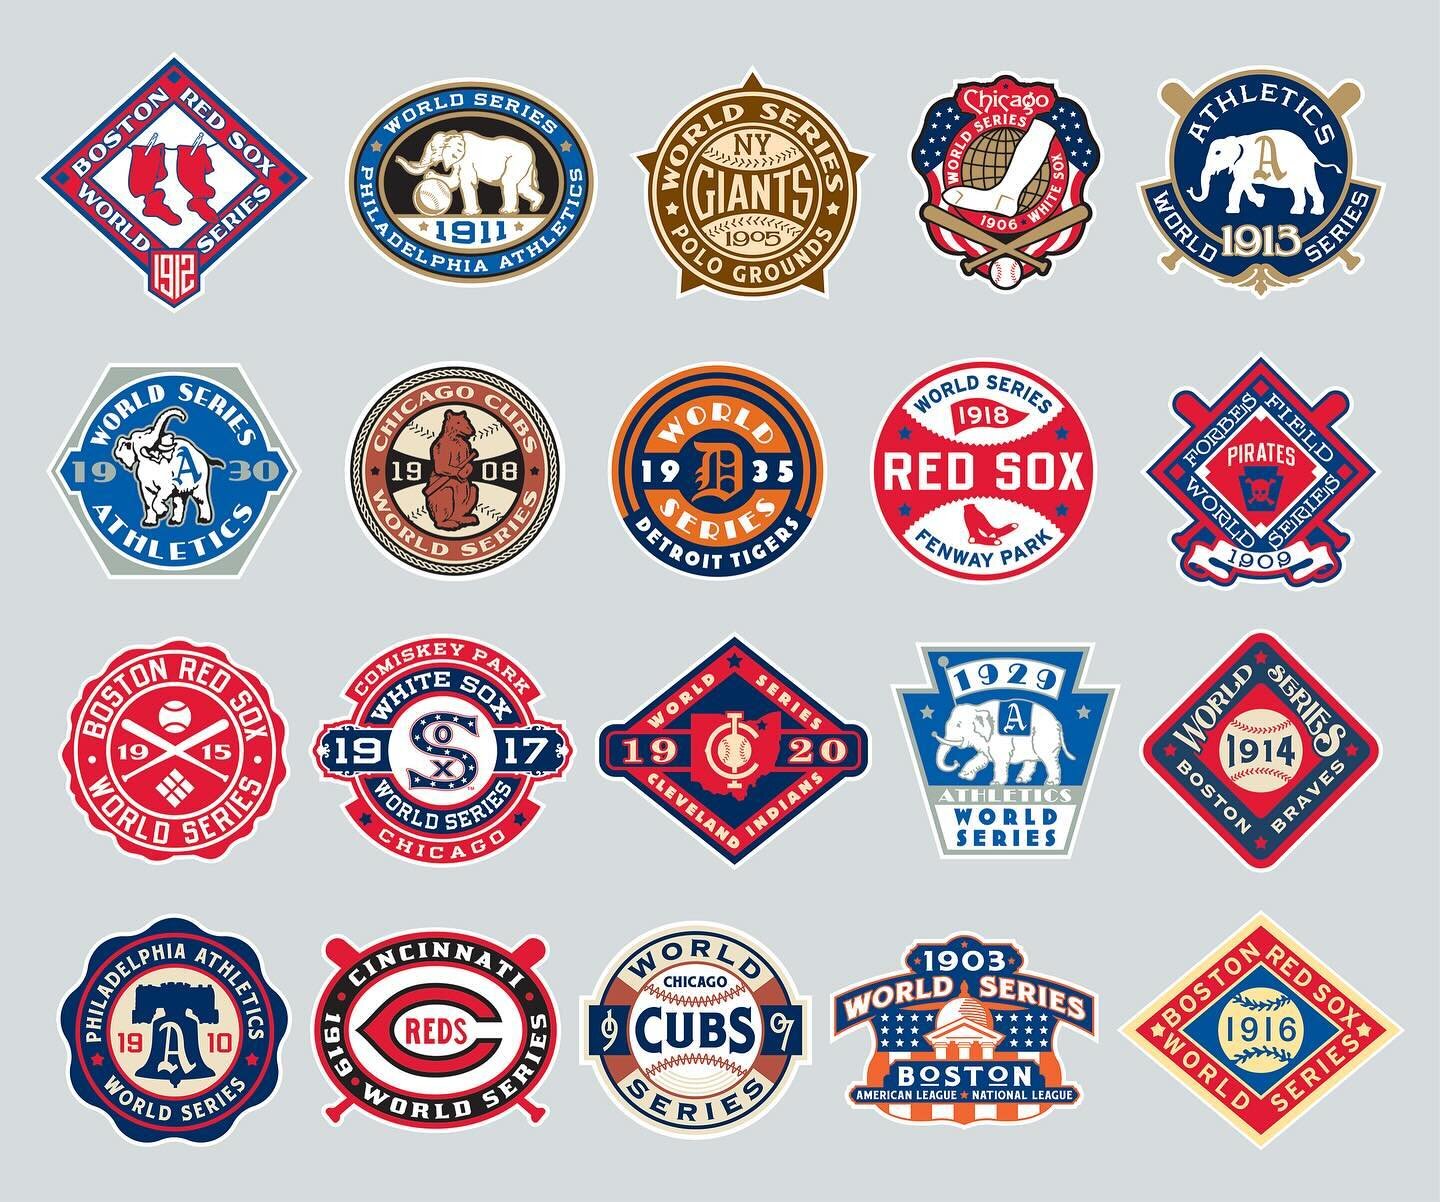 World Series logos that never existed&hellip;until I created them in 2003.